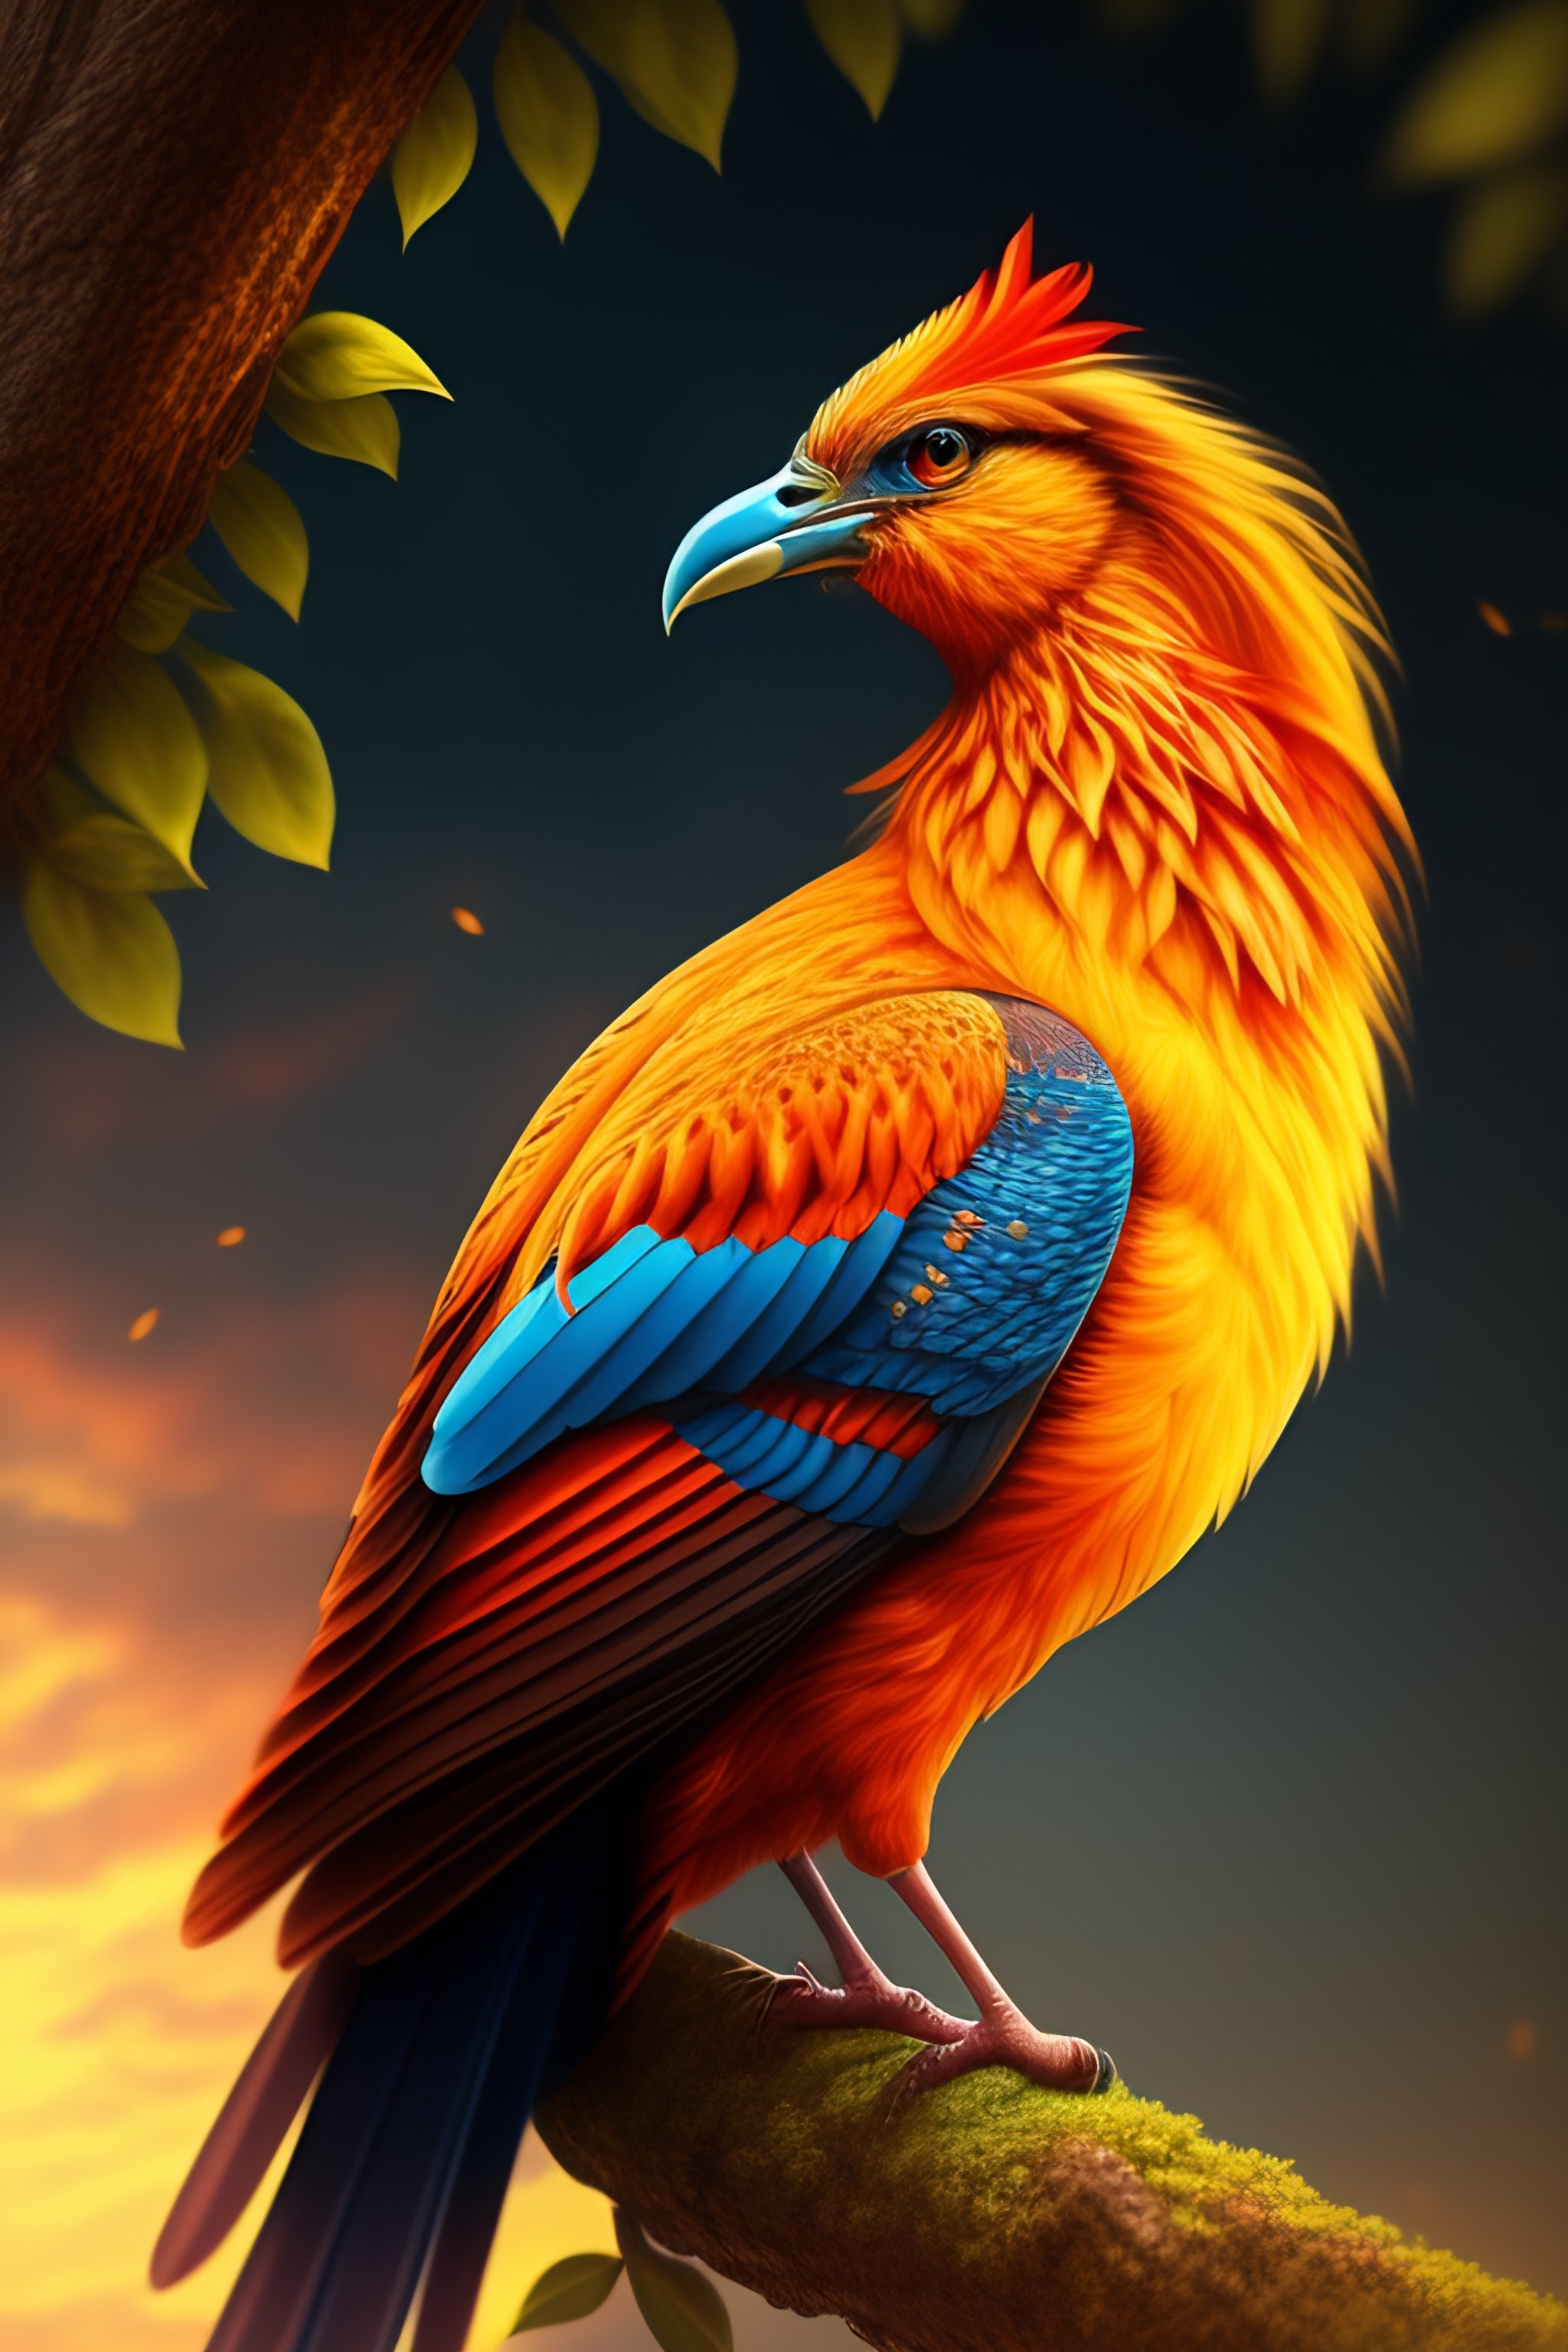 Lexica - Landscape, on it a woman in the form of a phoenix bird, sitting on  a tree branch, realistic feathers,